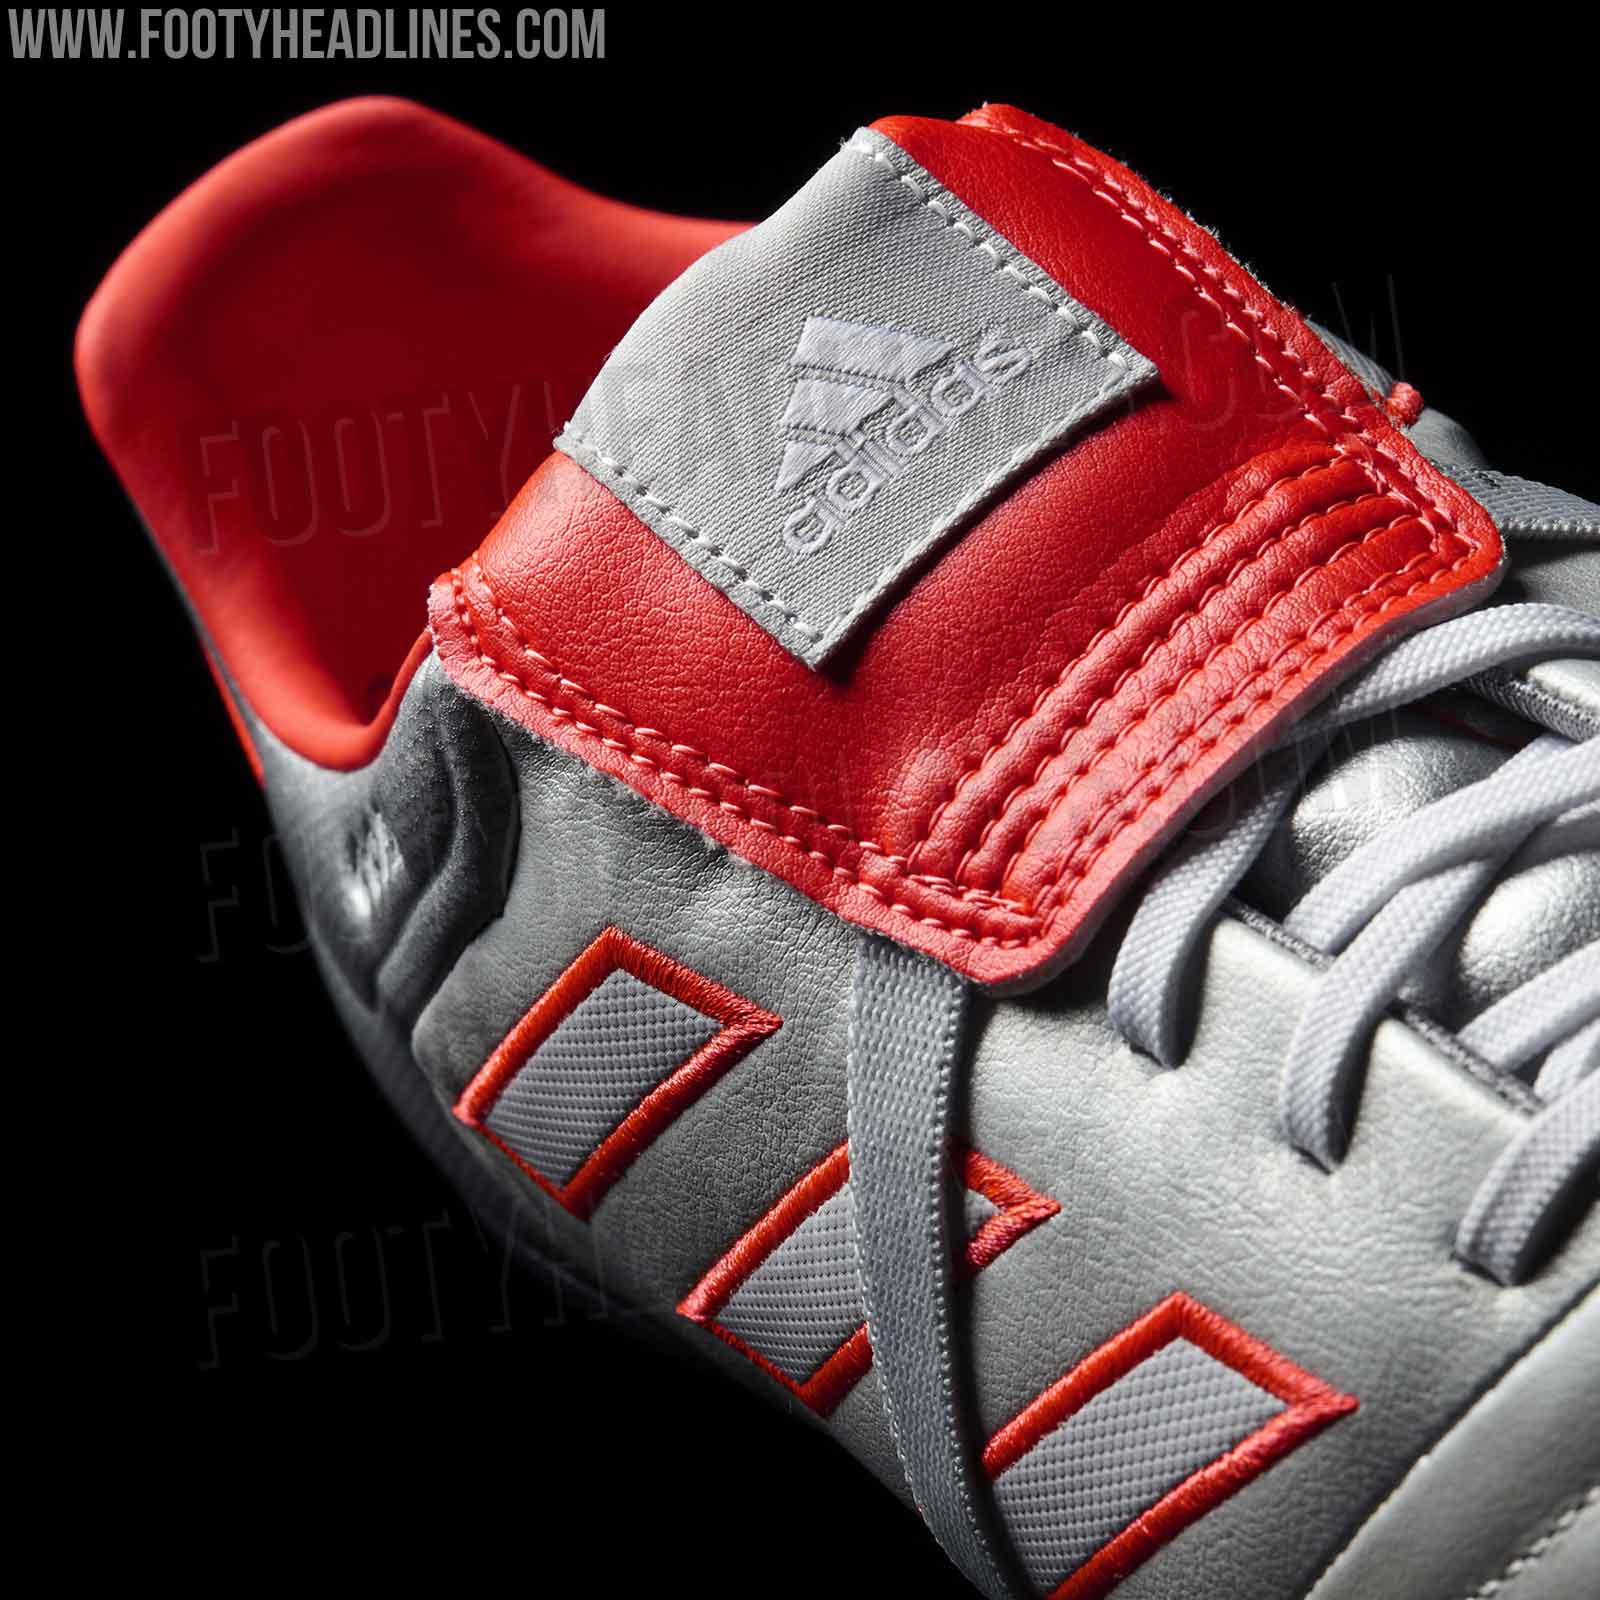 Silver / Red' Adidas Copa 17 Boots Released - Footy